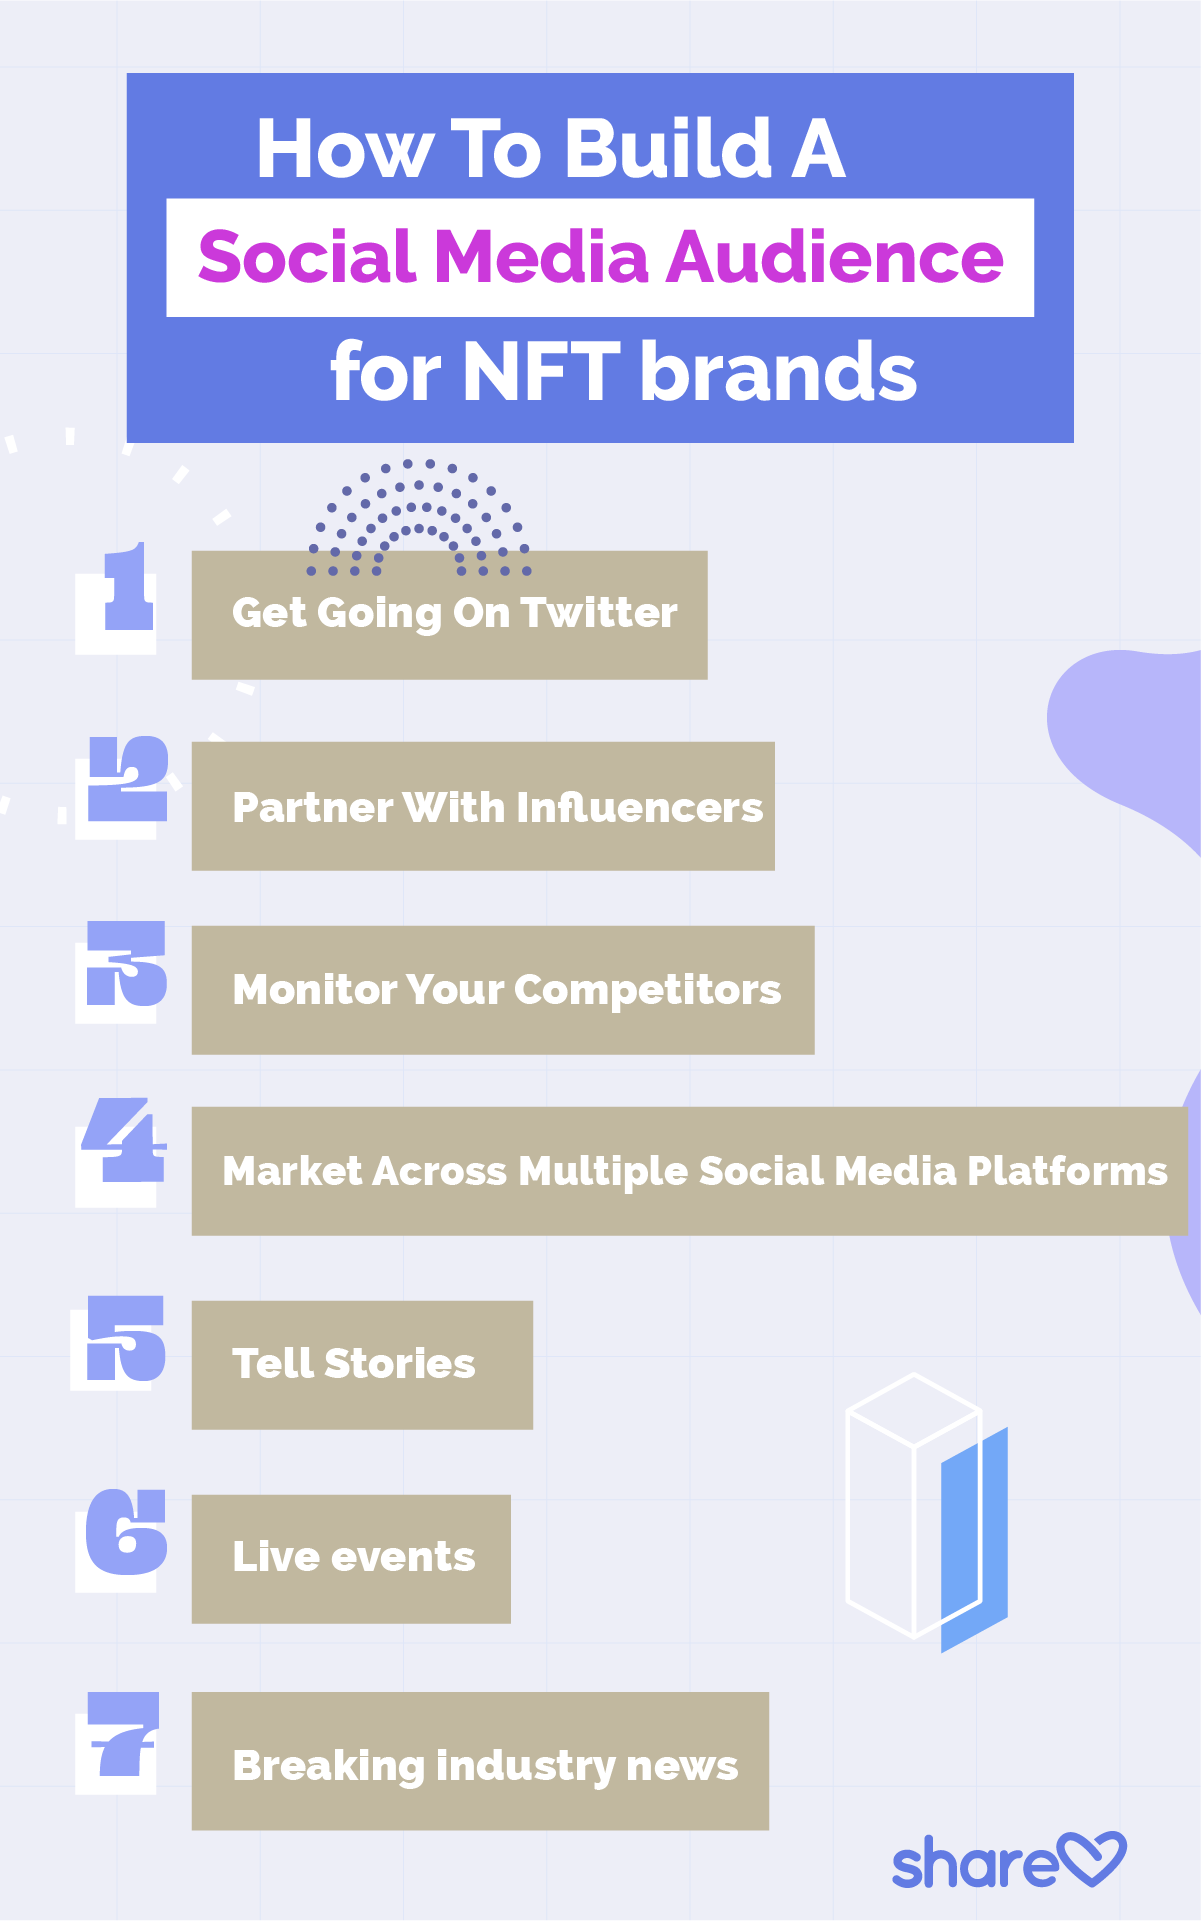 How To Build A Social Media Audience for NFT brands